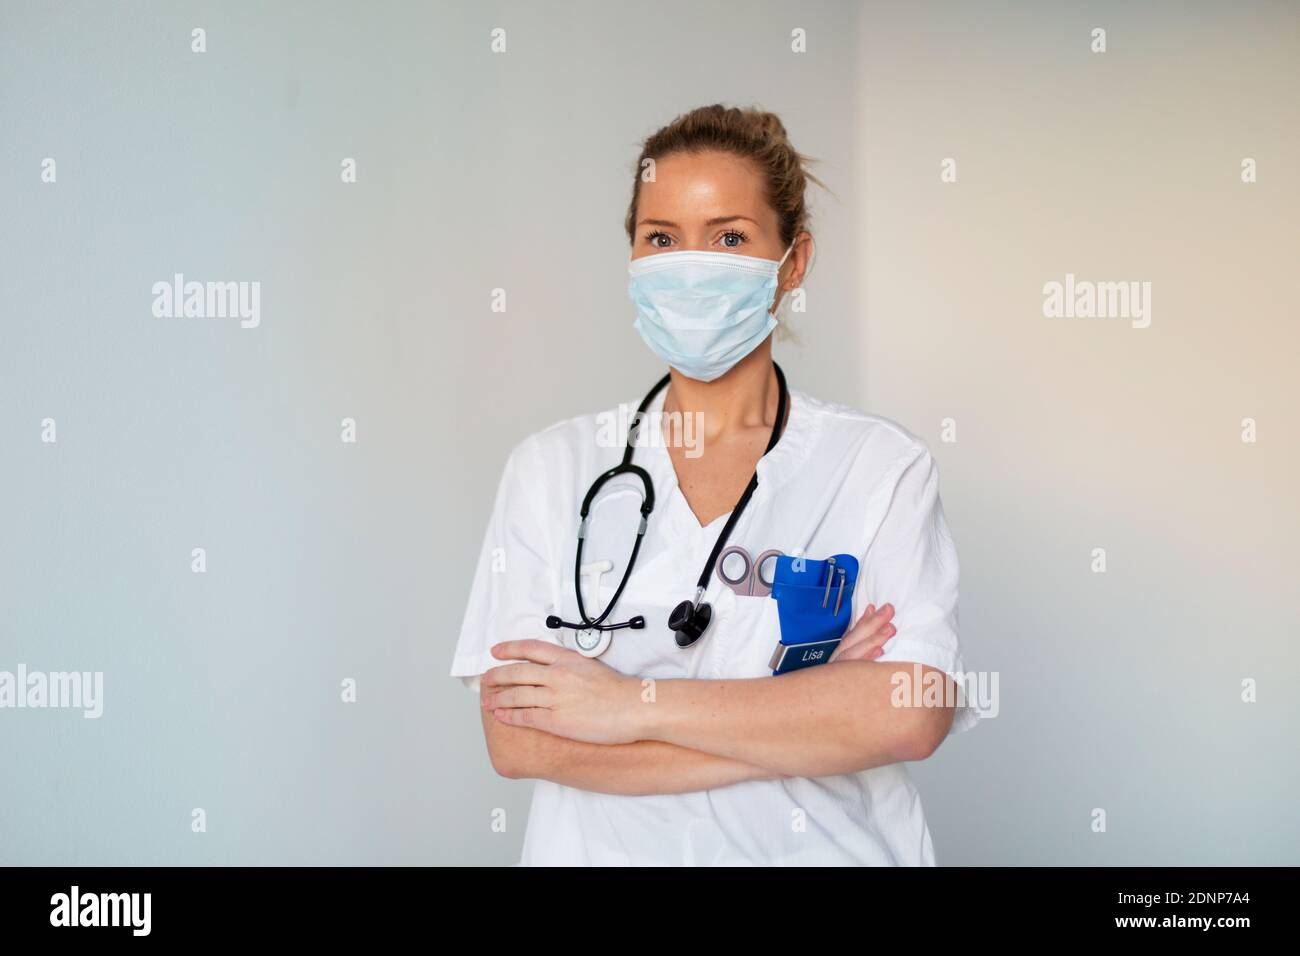 Female doctor wearing face mask Stock Photo